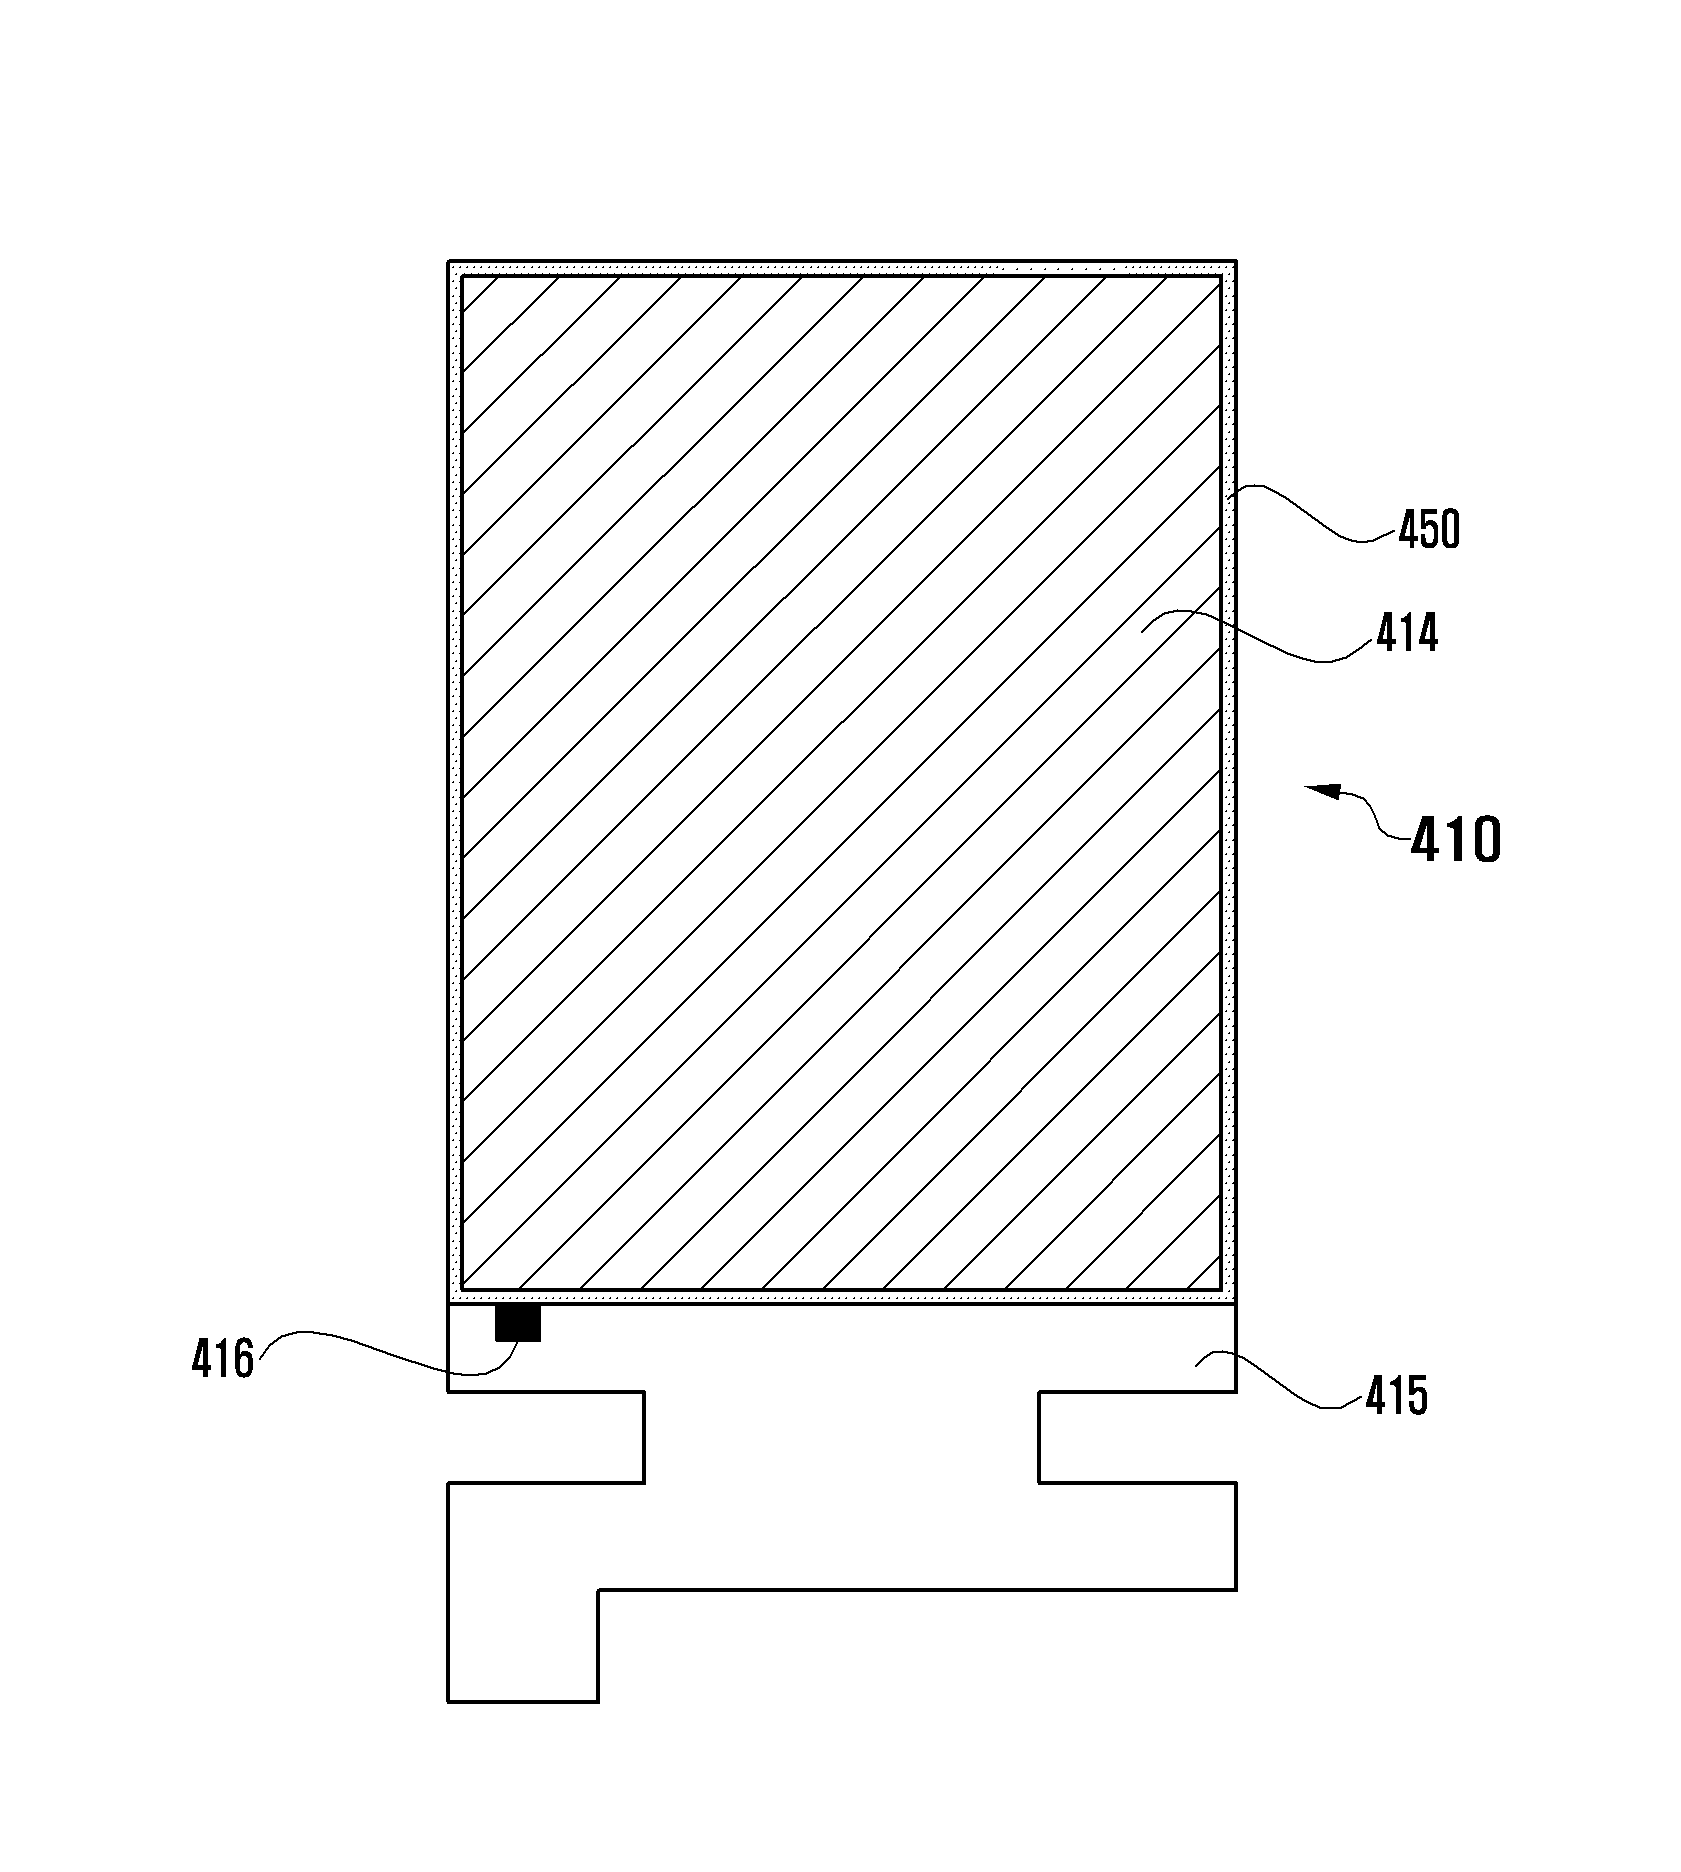 Touch screen panel liquid crystal display device